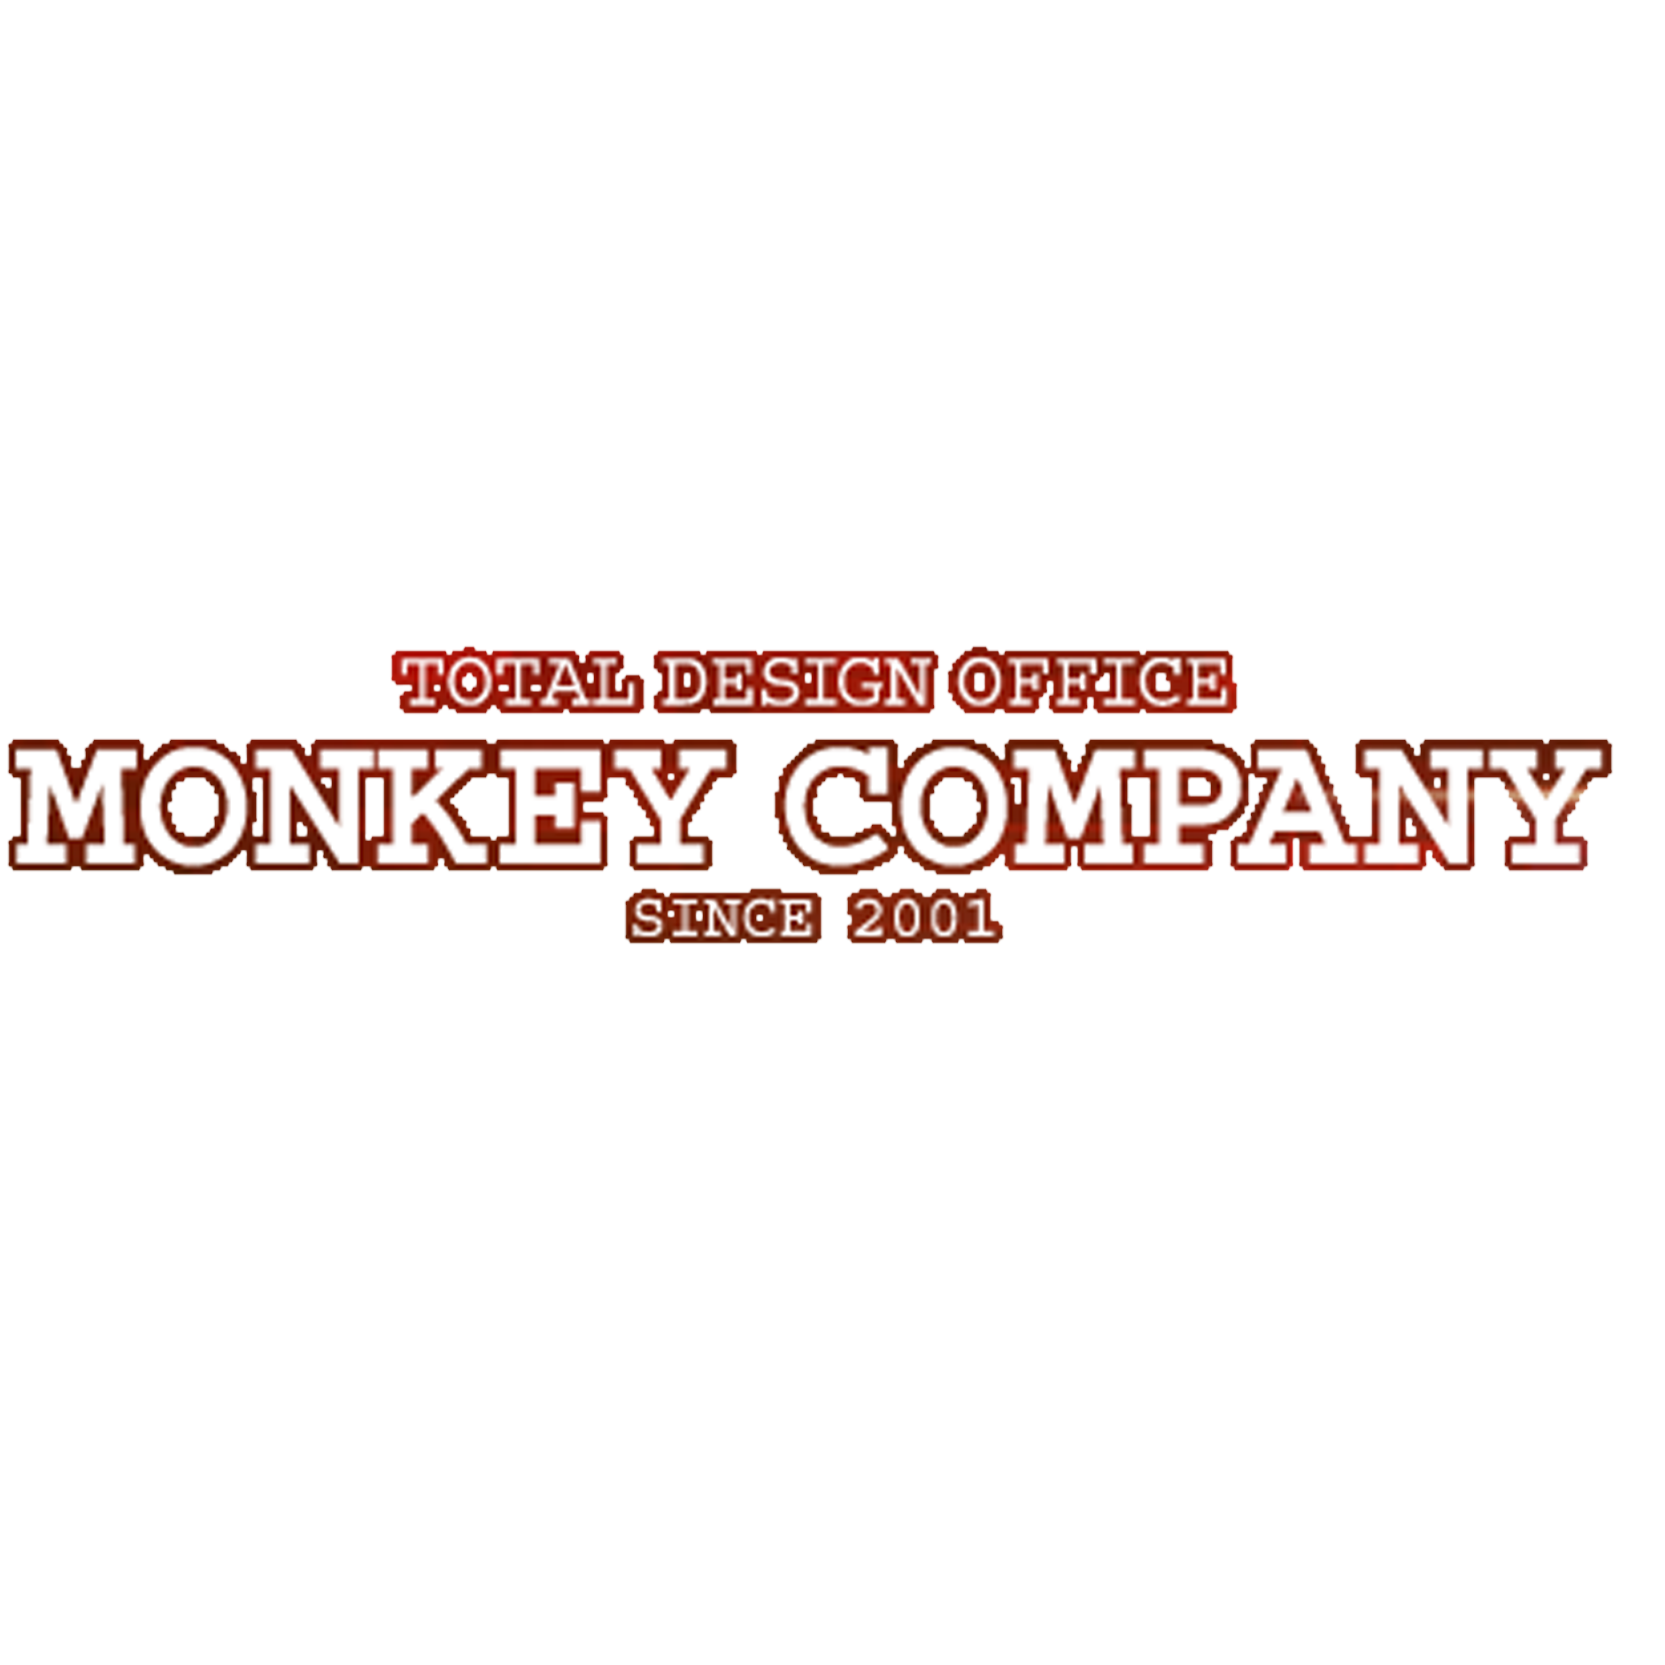 TOTAL DESIGN OFFICE MONKEY COMPANY SINCE2001